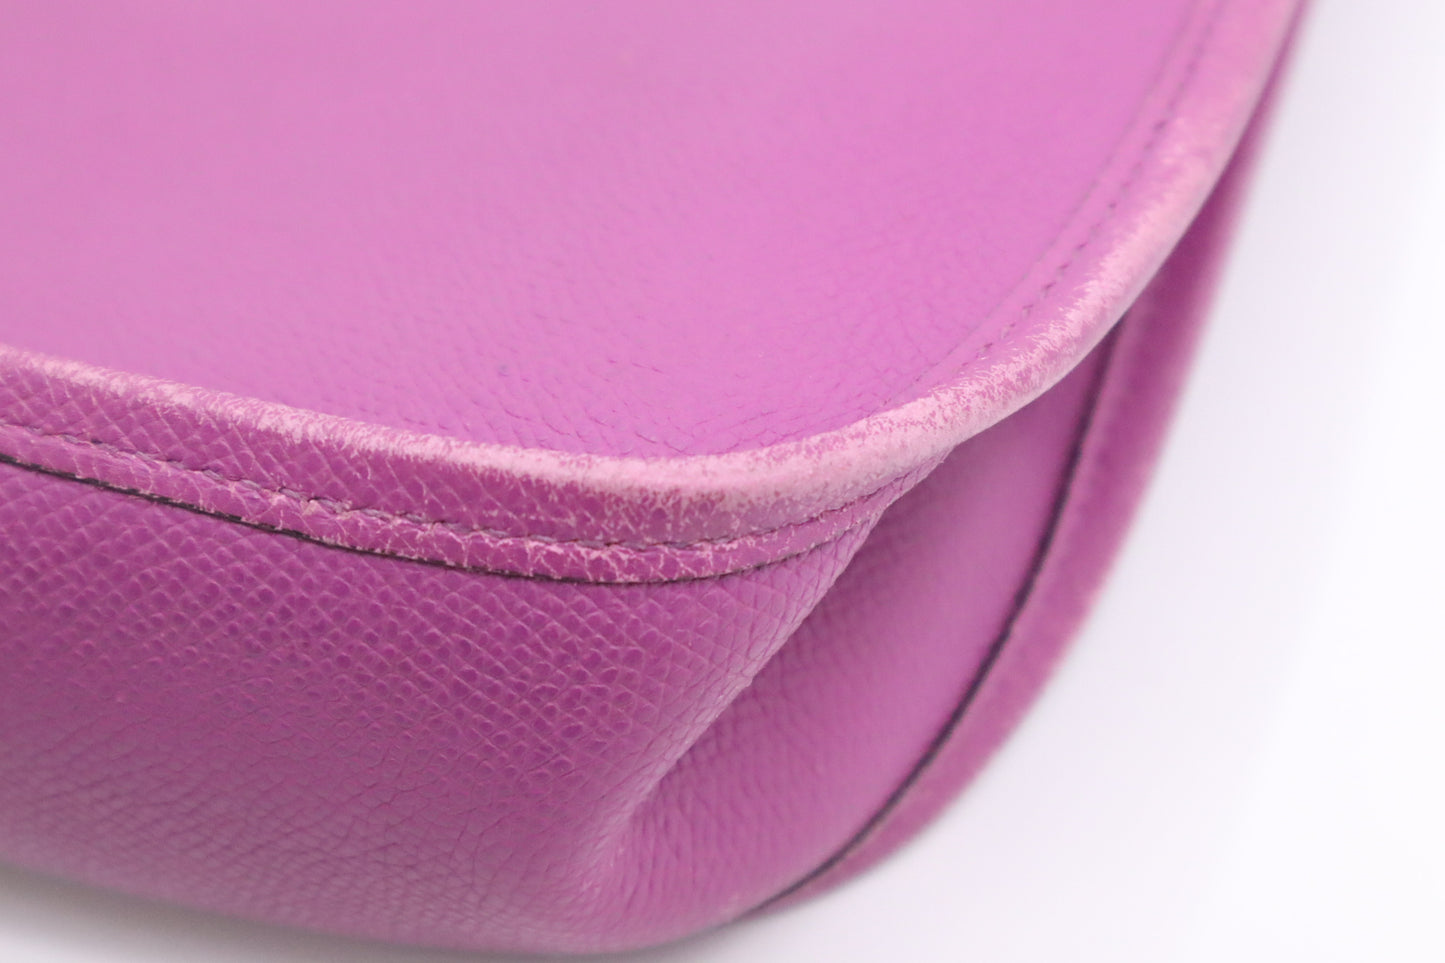 Hermes Evelyne PM in Purple Leather